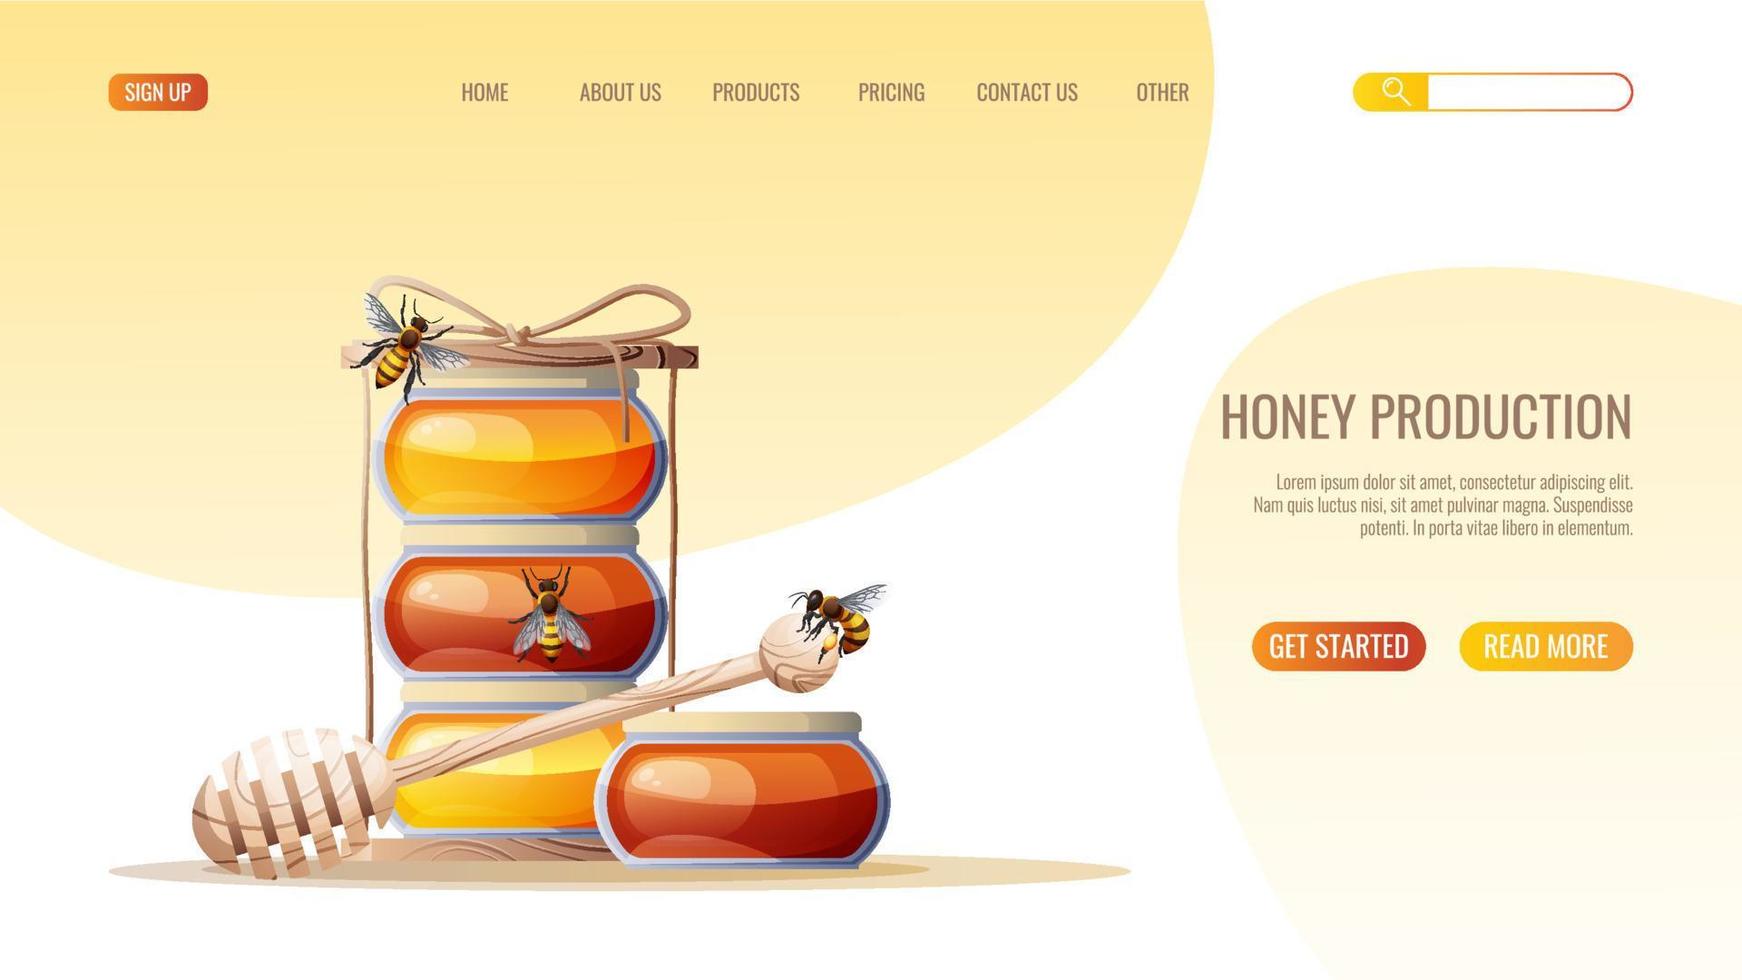 Healthy food, natural product. Honey jar, spoon, honey, bees. Web page design template for store, honey website. Vector illustration for banner, advertisement, web page, cover